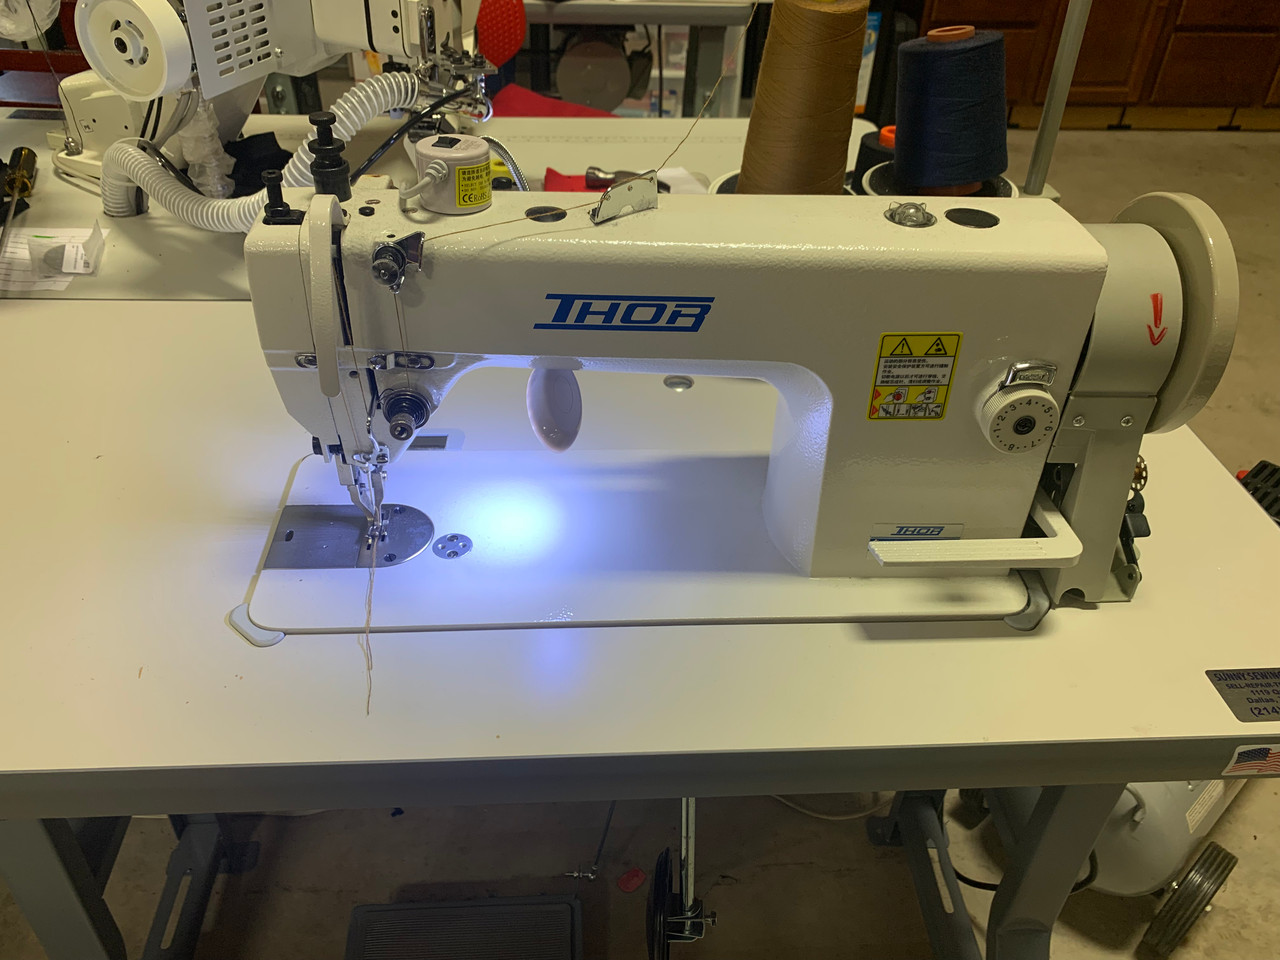 THOR RE-0303 Top and Bottom Feed Walking Foot Sewing Machine. Used